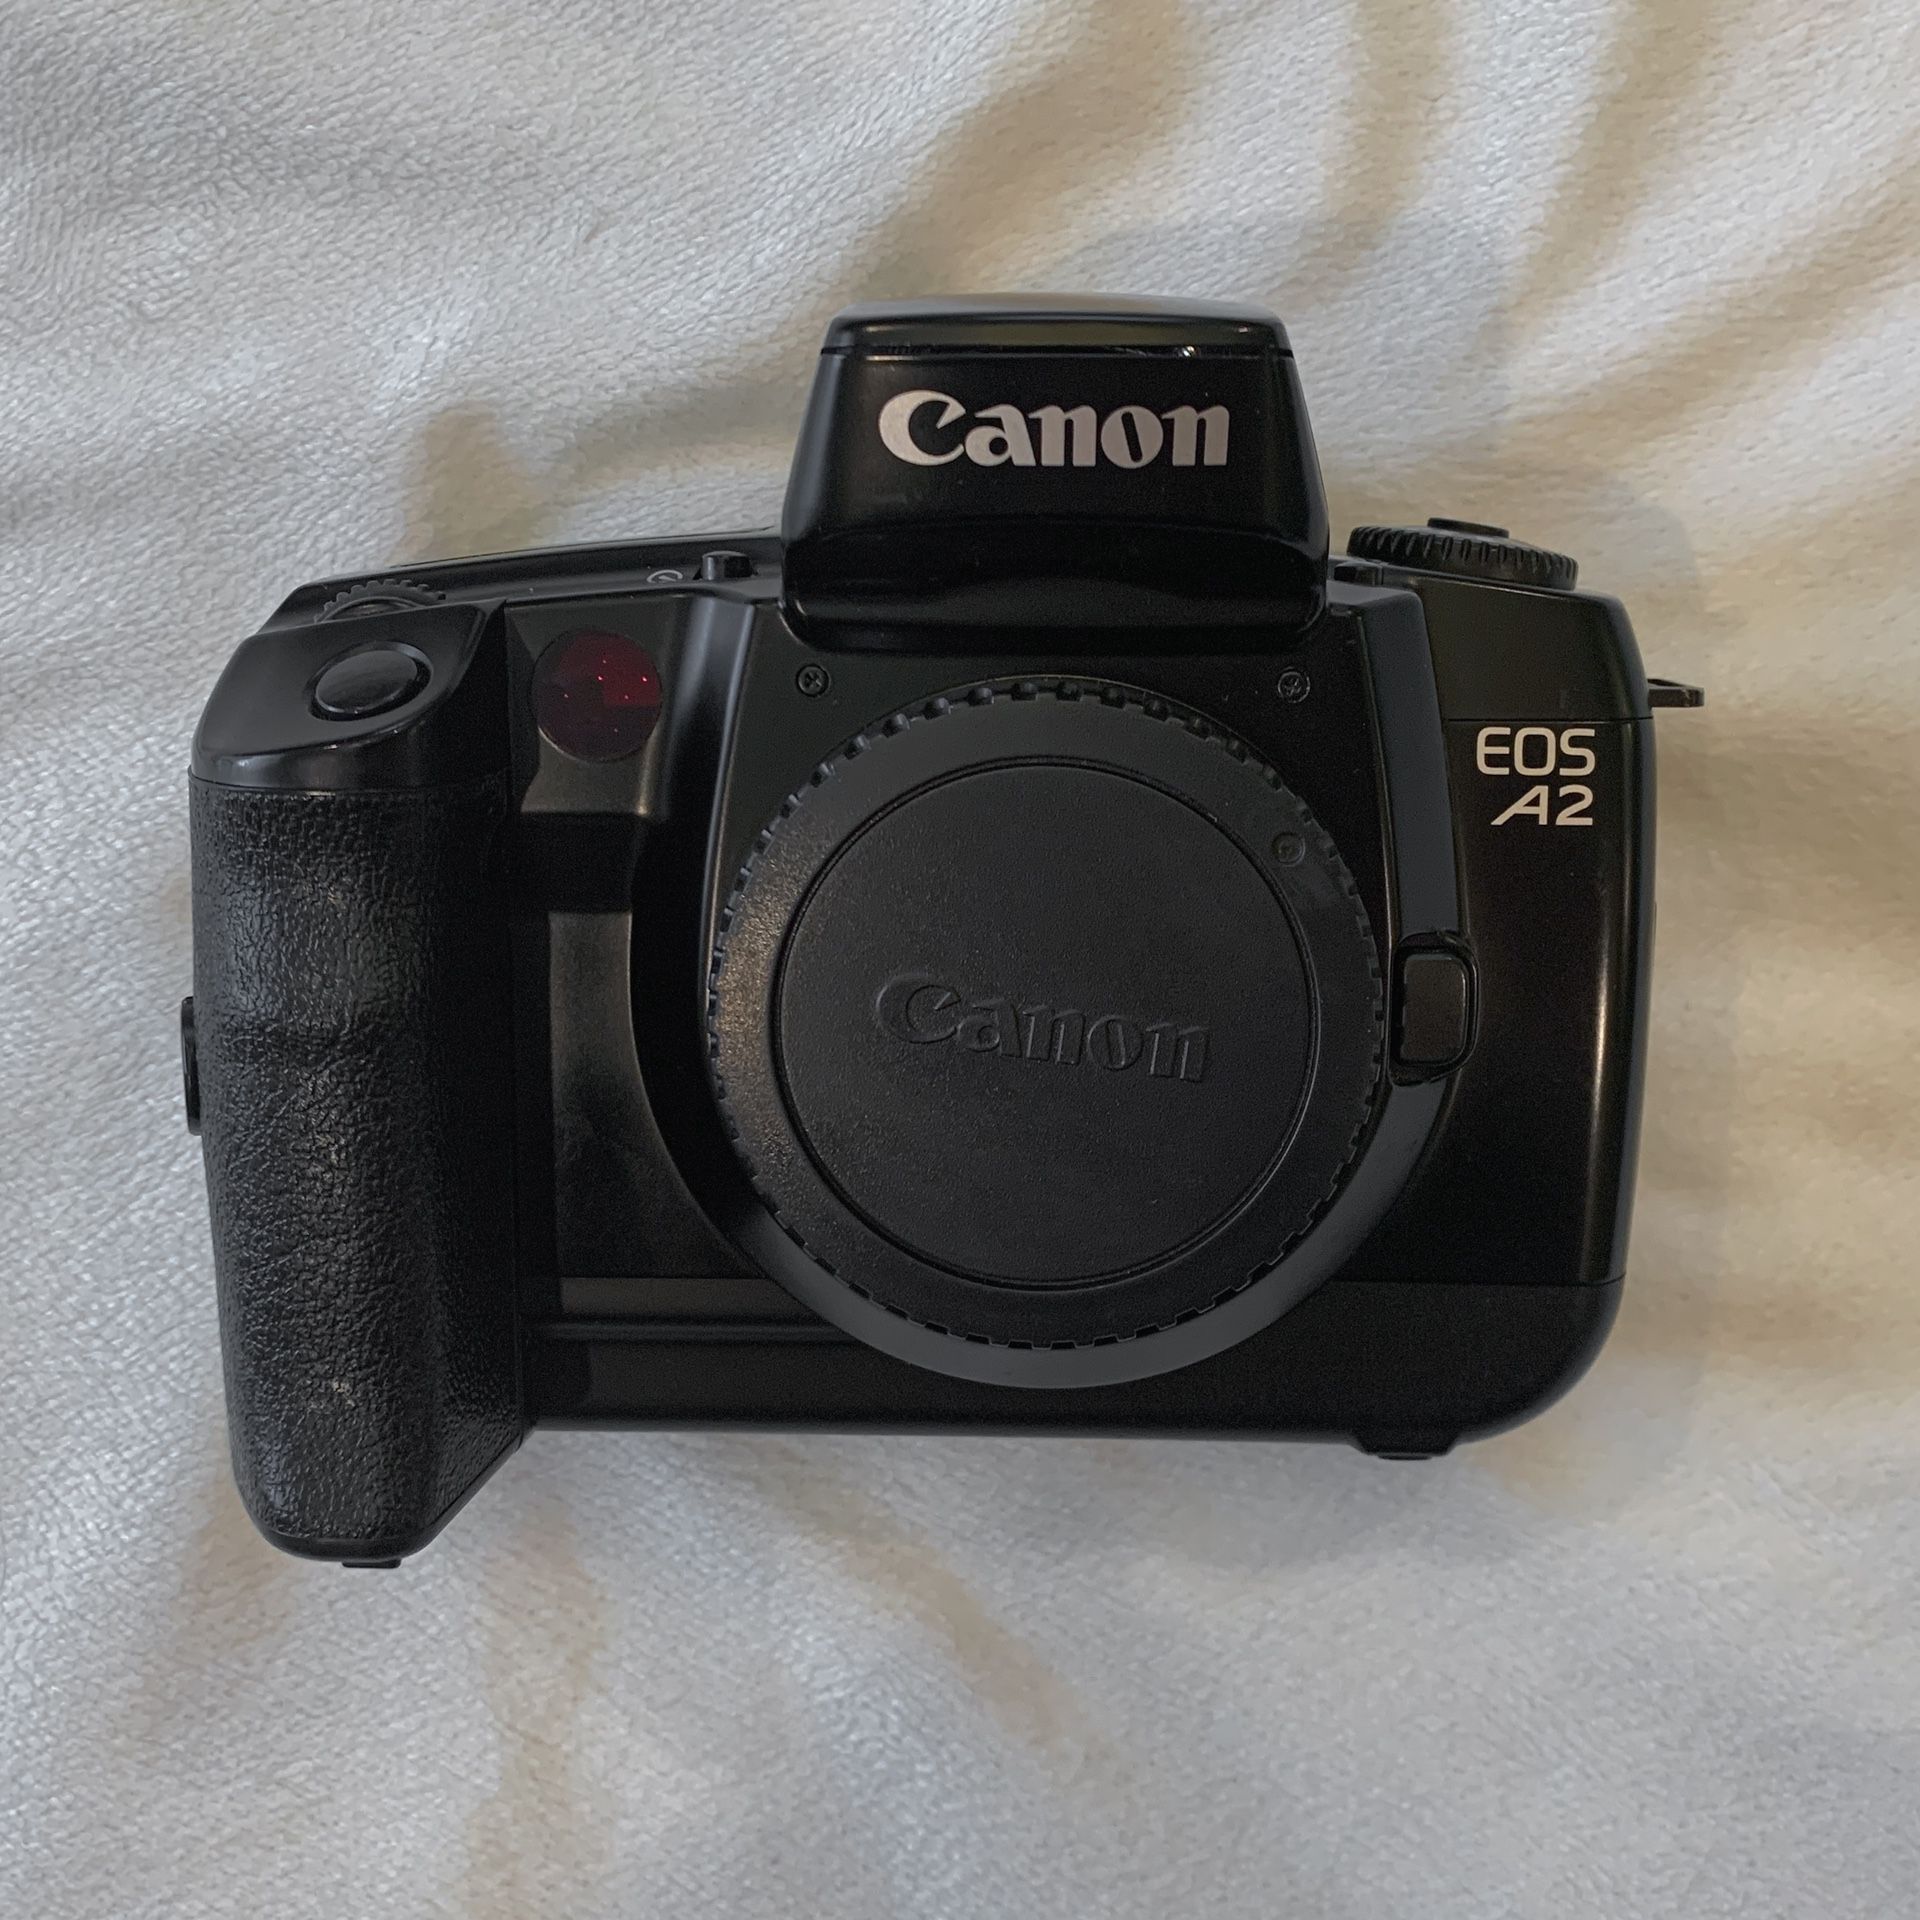 Canon EOS A2 SLR film camera with 28-80mm lens